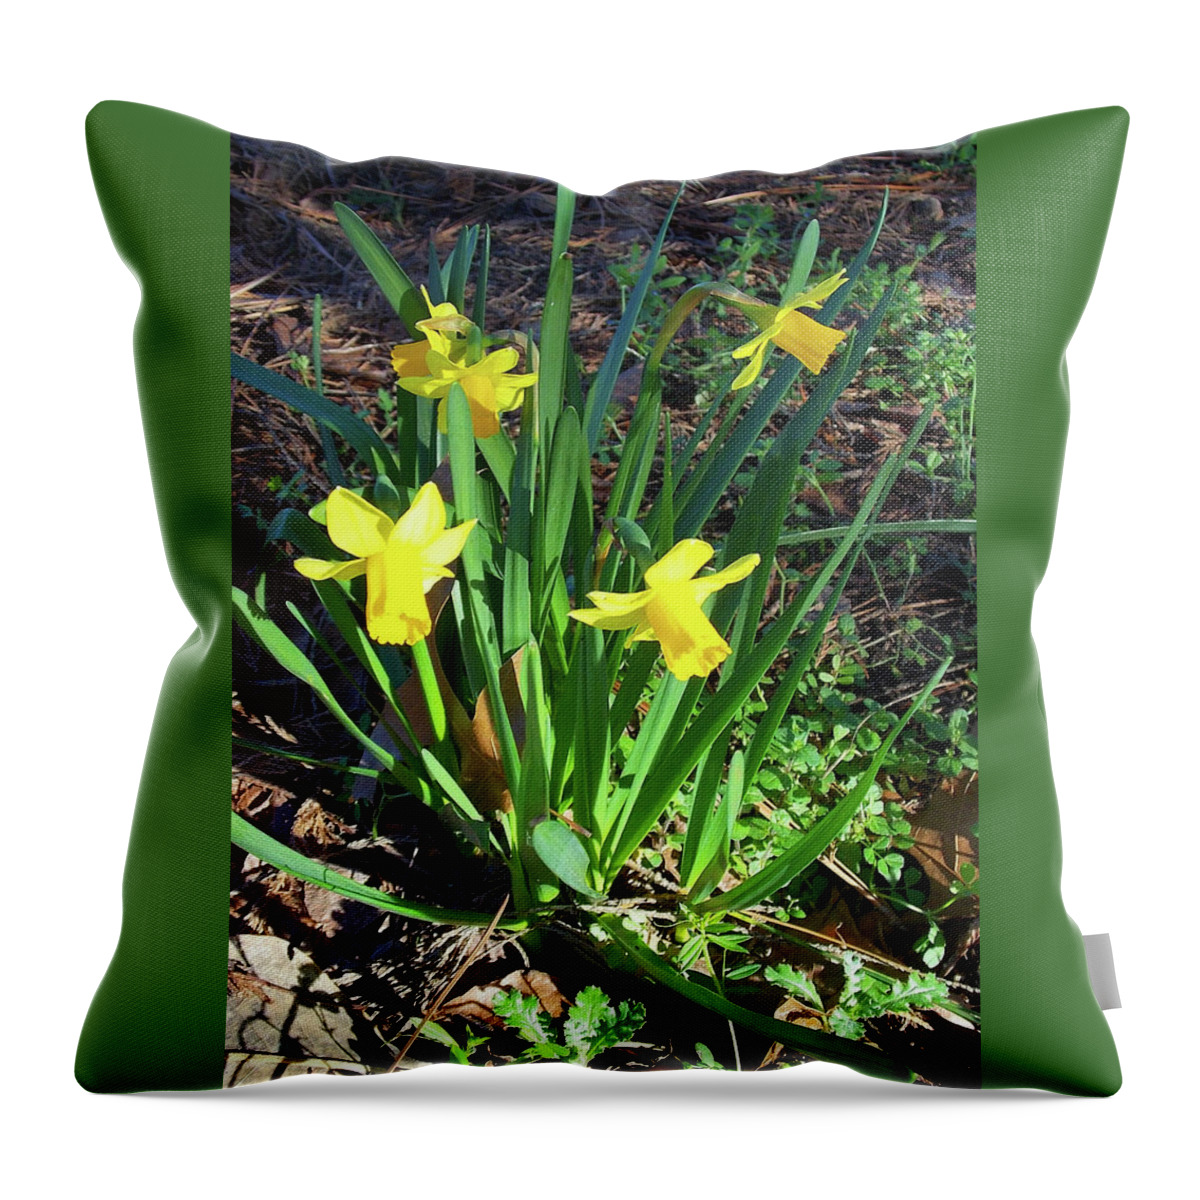 Flowers Throw Pillow featuring the photograph Spring Flowers by Matthew Seufer